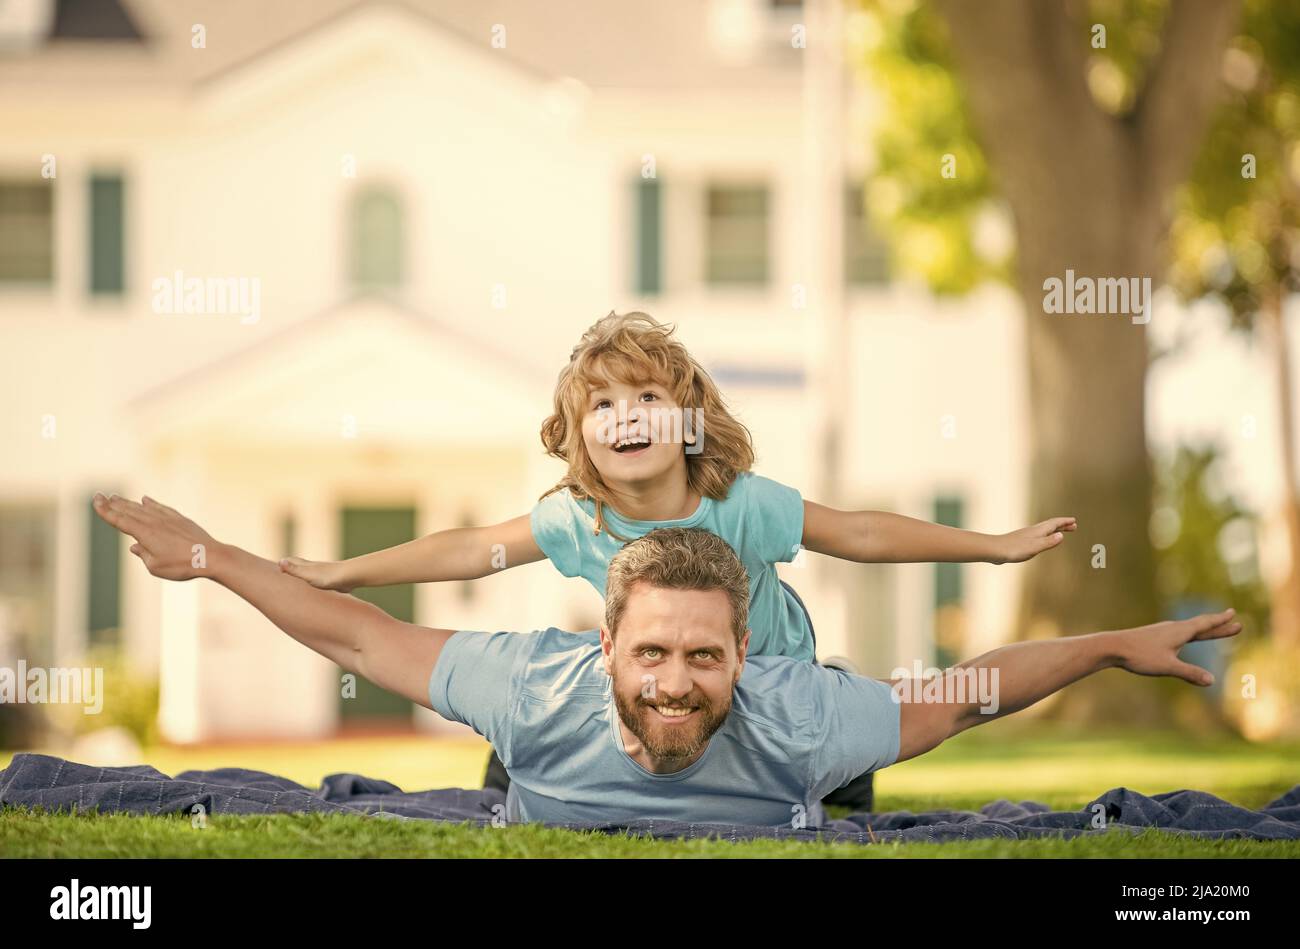 family value. childhood and parenthood. parent rest with little child boy on grass Stock Photo